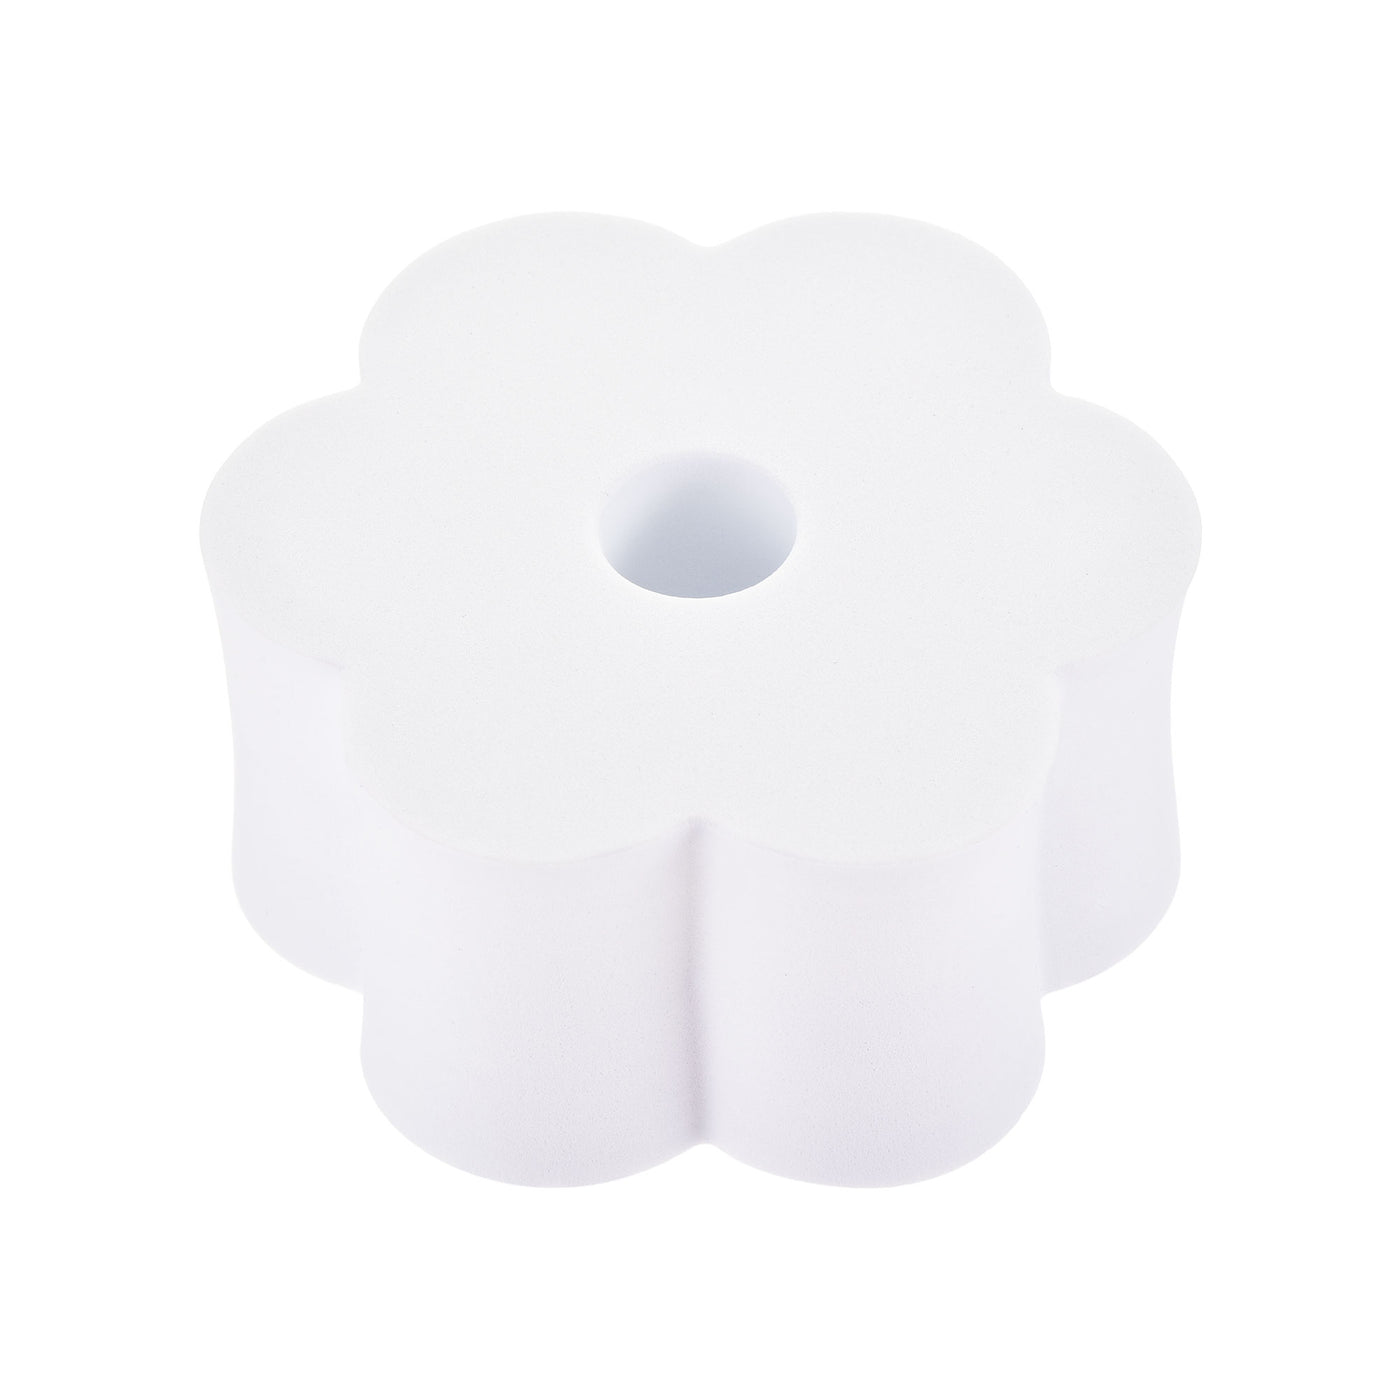 uxcell Uxcell Cup Turner Foam 3.74 Inch Diameter Foam Inserts White for 3/4 Inch PVC Pipe 6Pcs